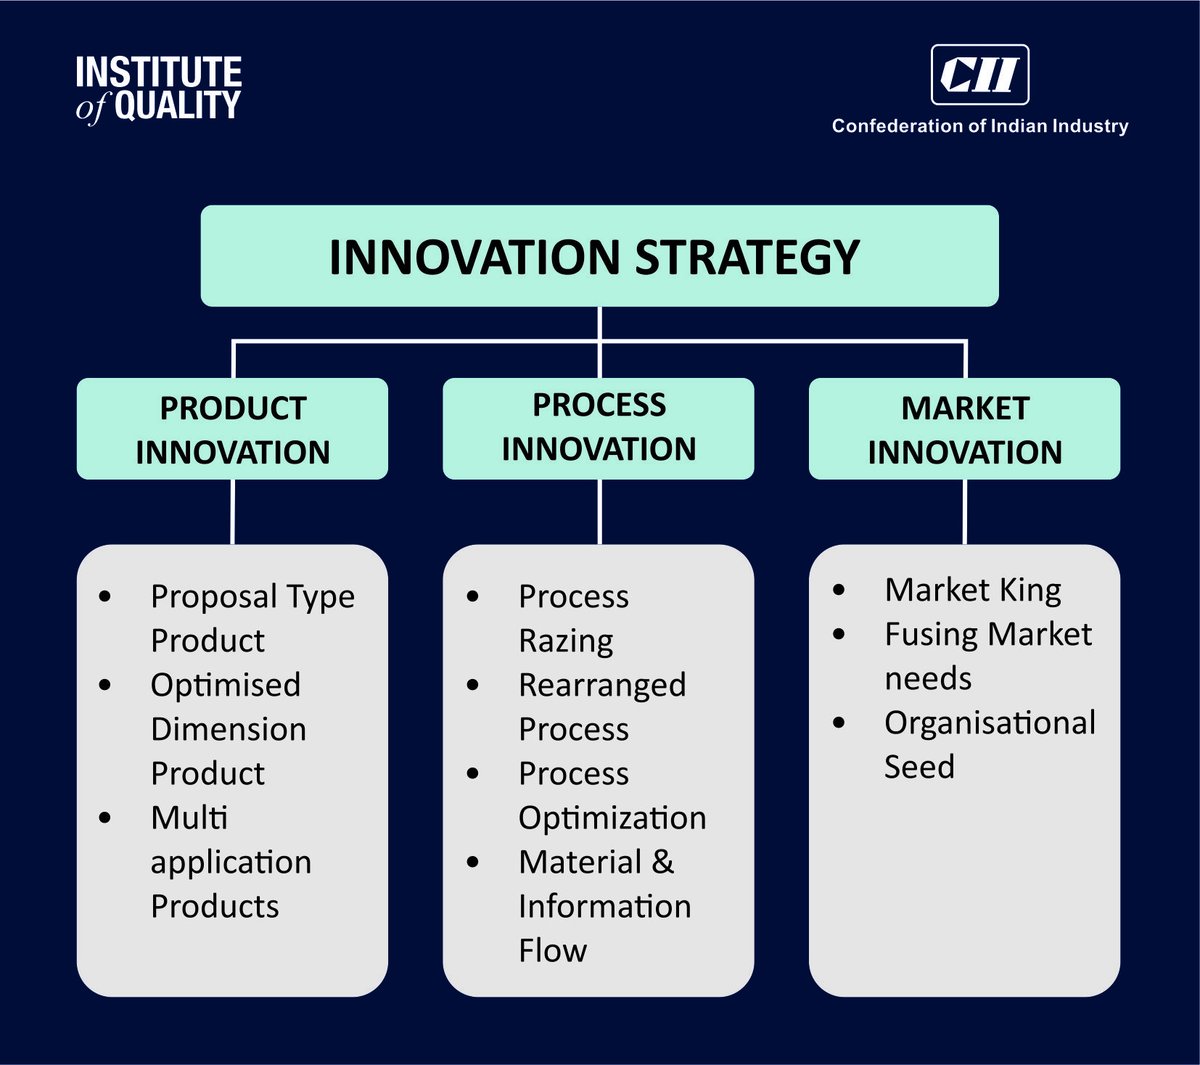 By incorporating TPM into their innovation strategy, organizations can create a framework for fostering creativity, driving meaningful change, and achieving sustainable growth in the long term. @CIIEvents